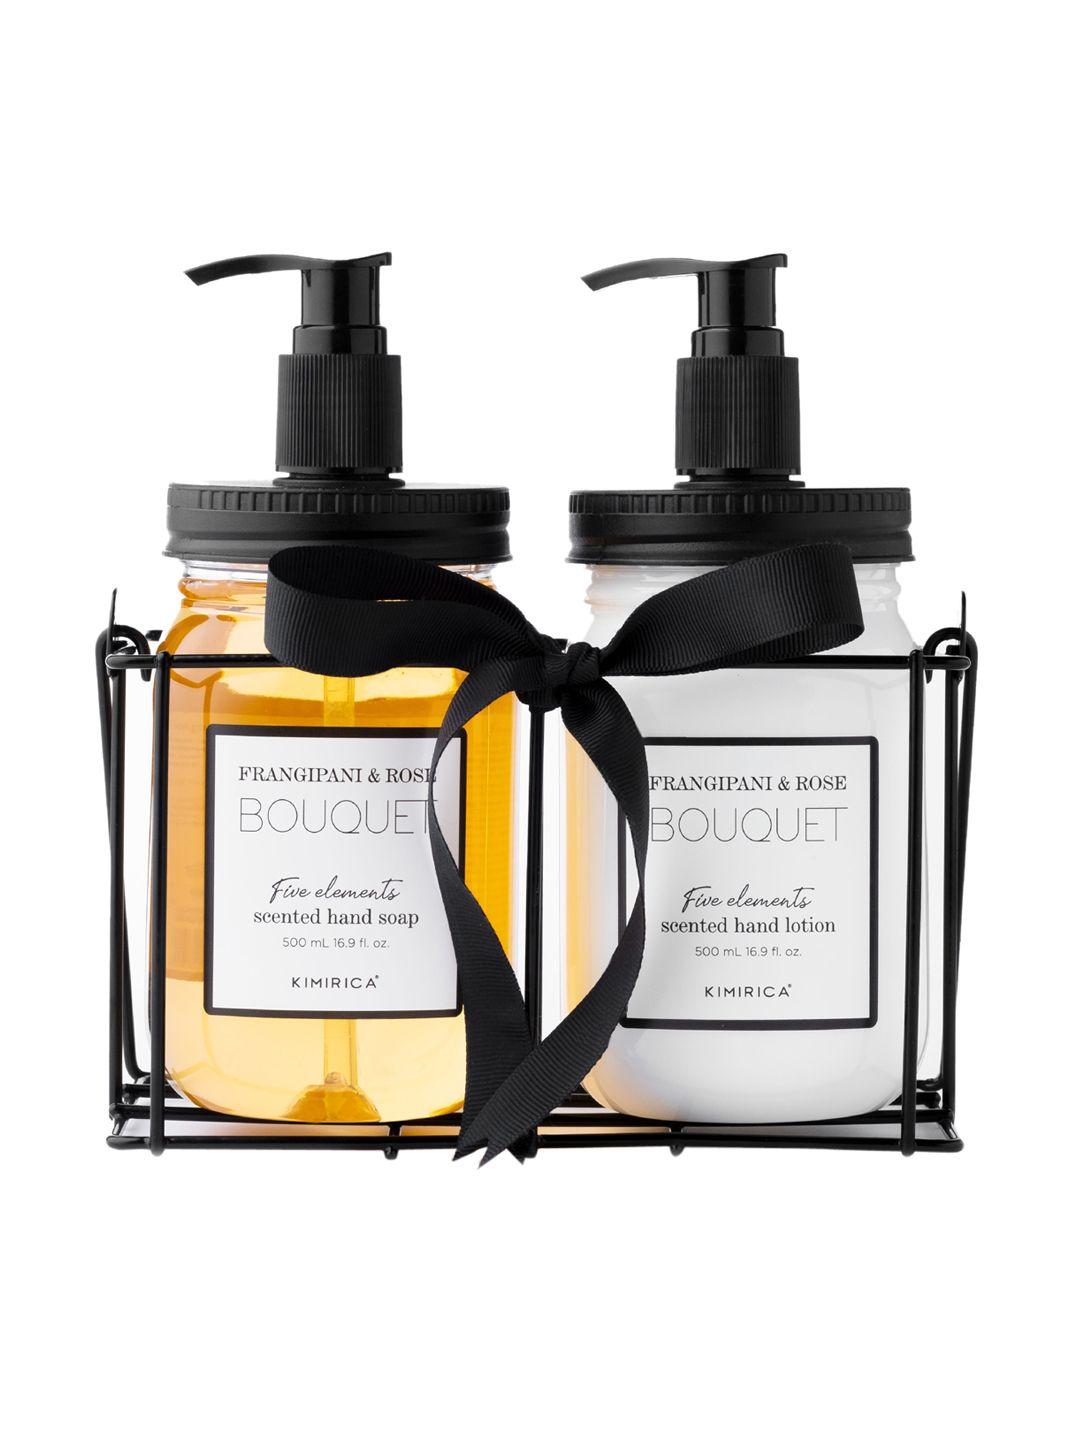 kimirica set of frangipani & rose bouquet scented hand soap & hand lotion - 500 ml each